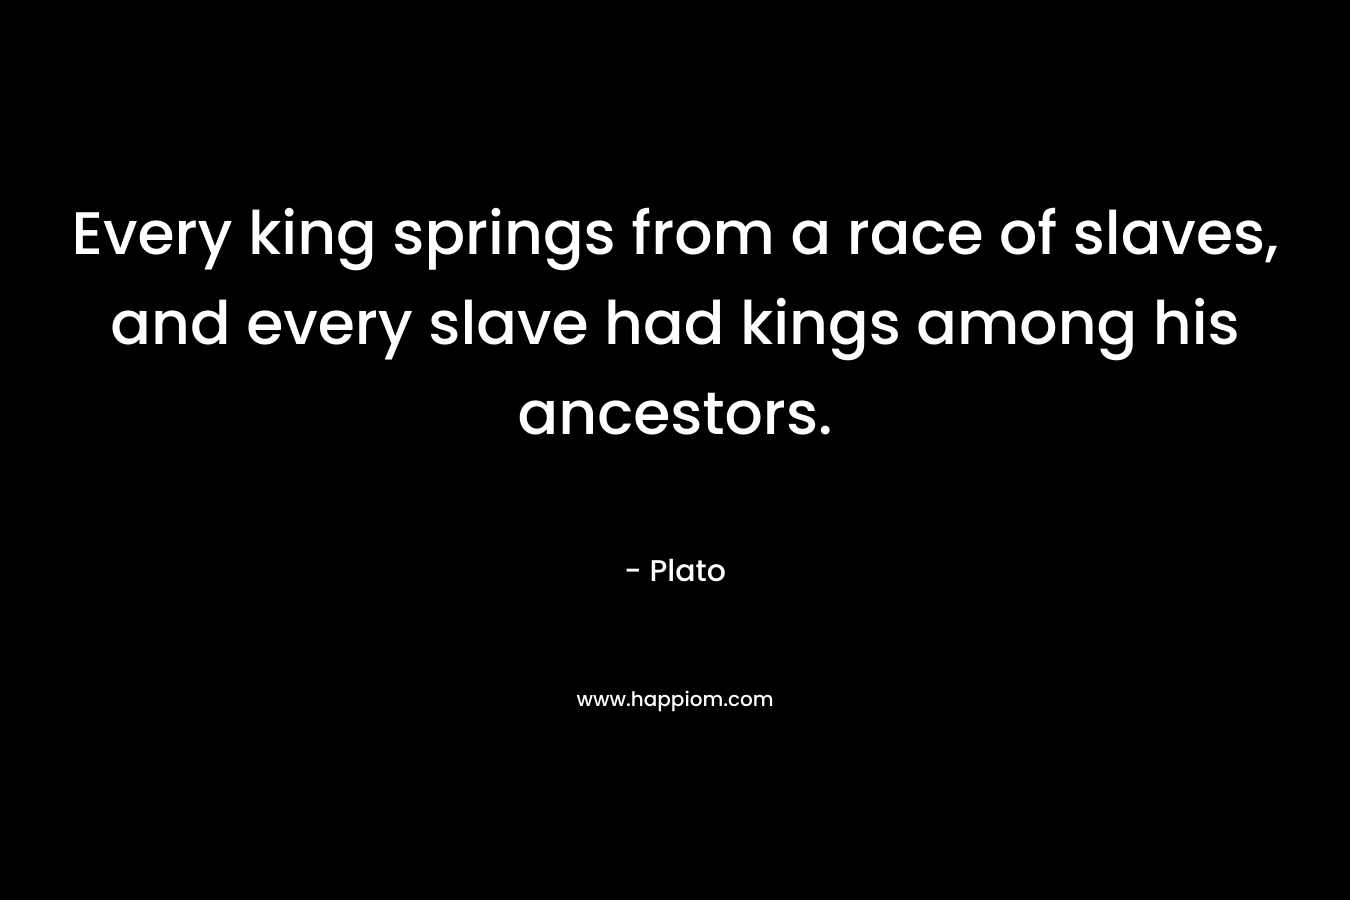 Every king springs from a race of slaves, and every slave had kings among his ancestors.